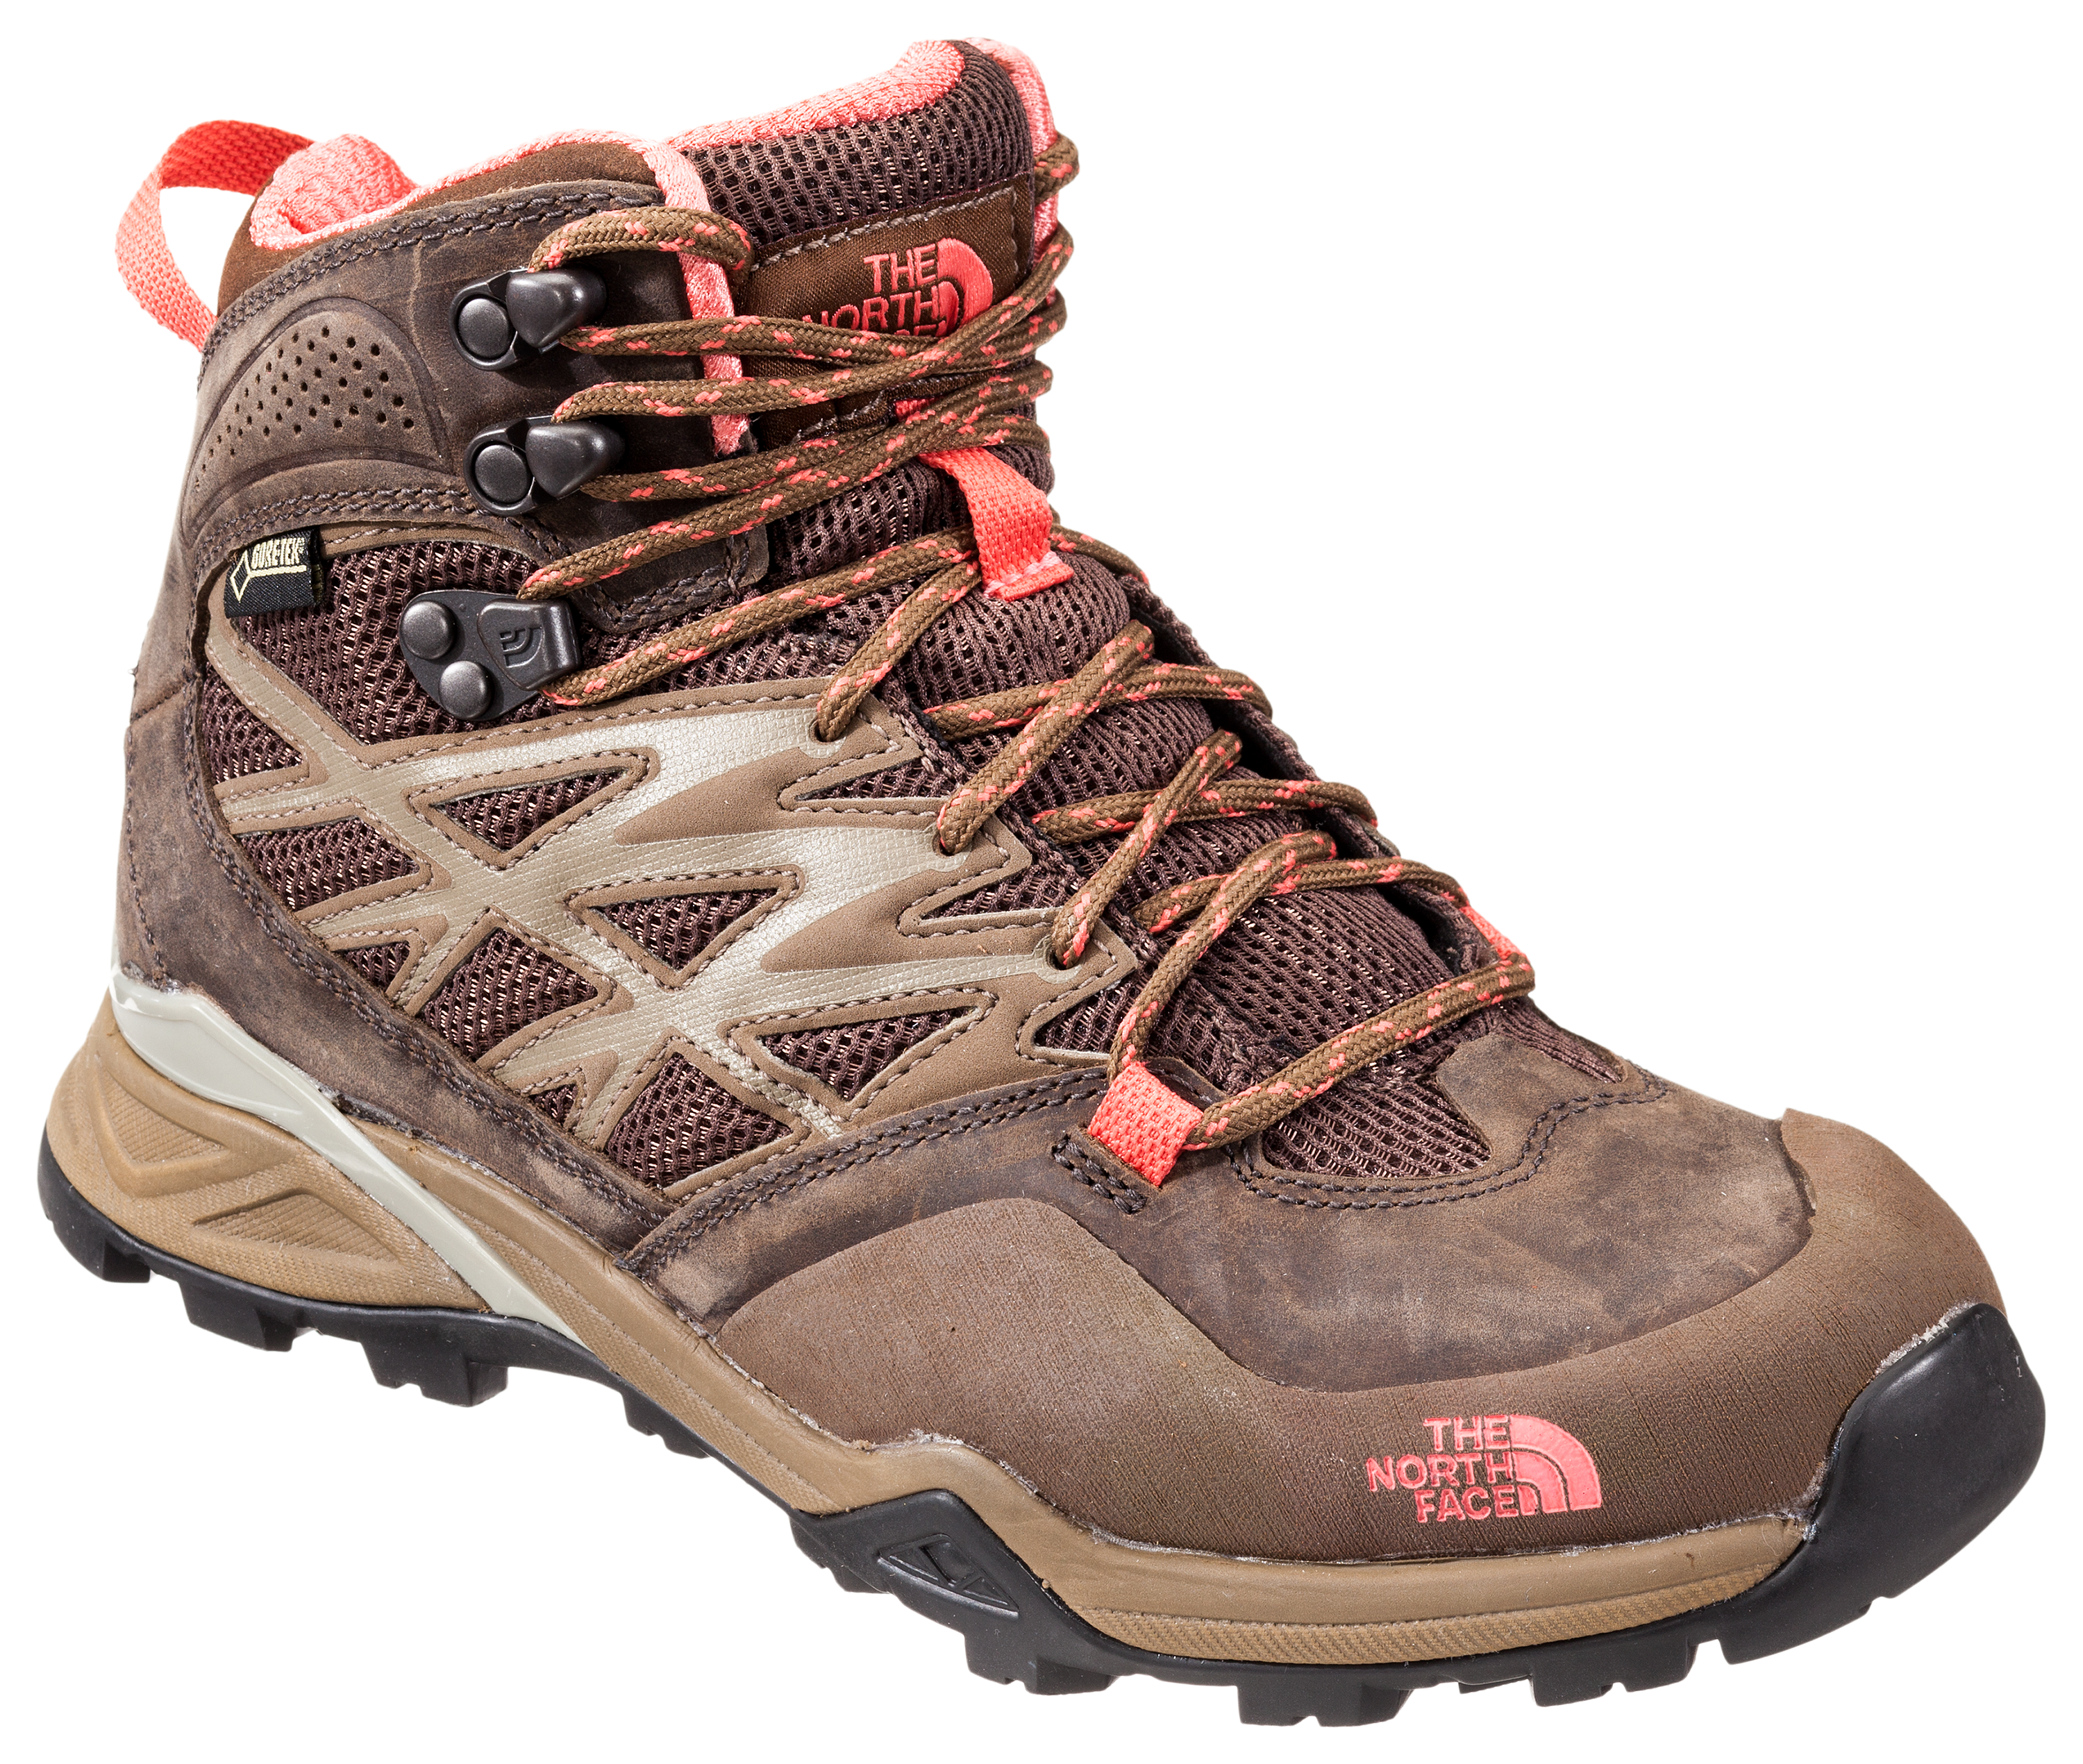 The North Face Mid GTX GORE-TEX Hiking Boots for Ladies | Bass Pro Shops